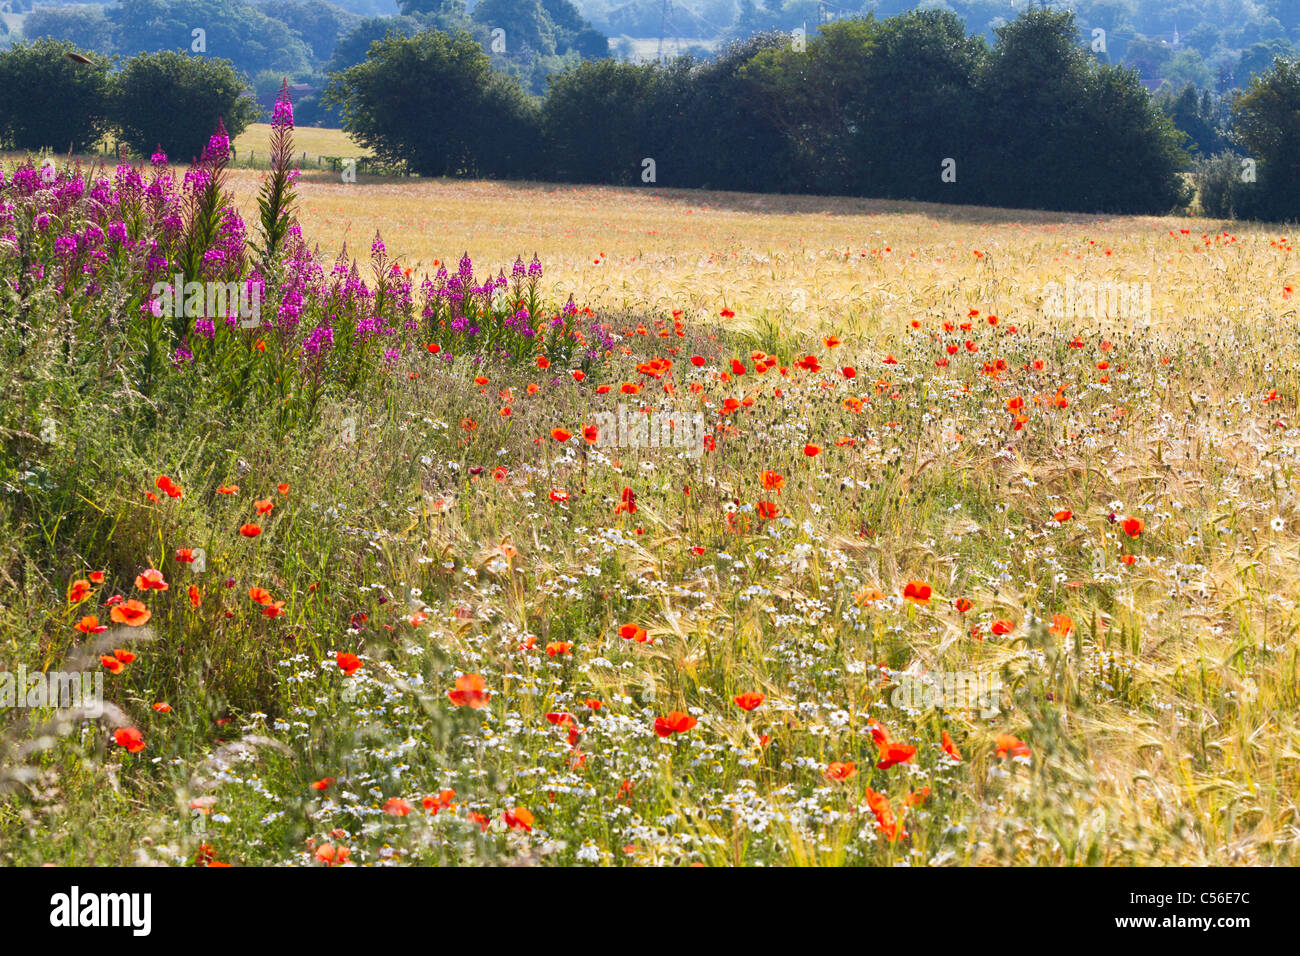 Summer wild flowers growing on the edge of a barley field Stock Photo